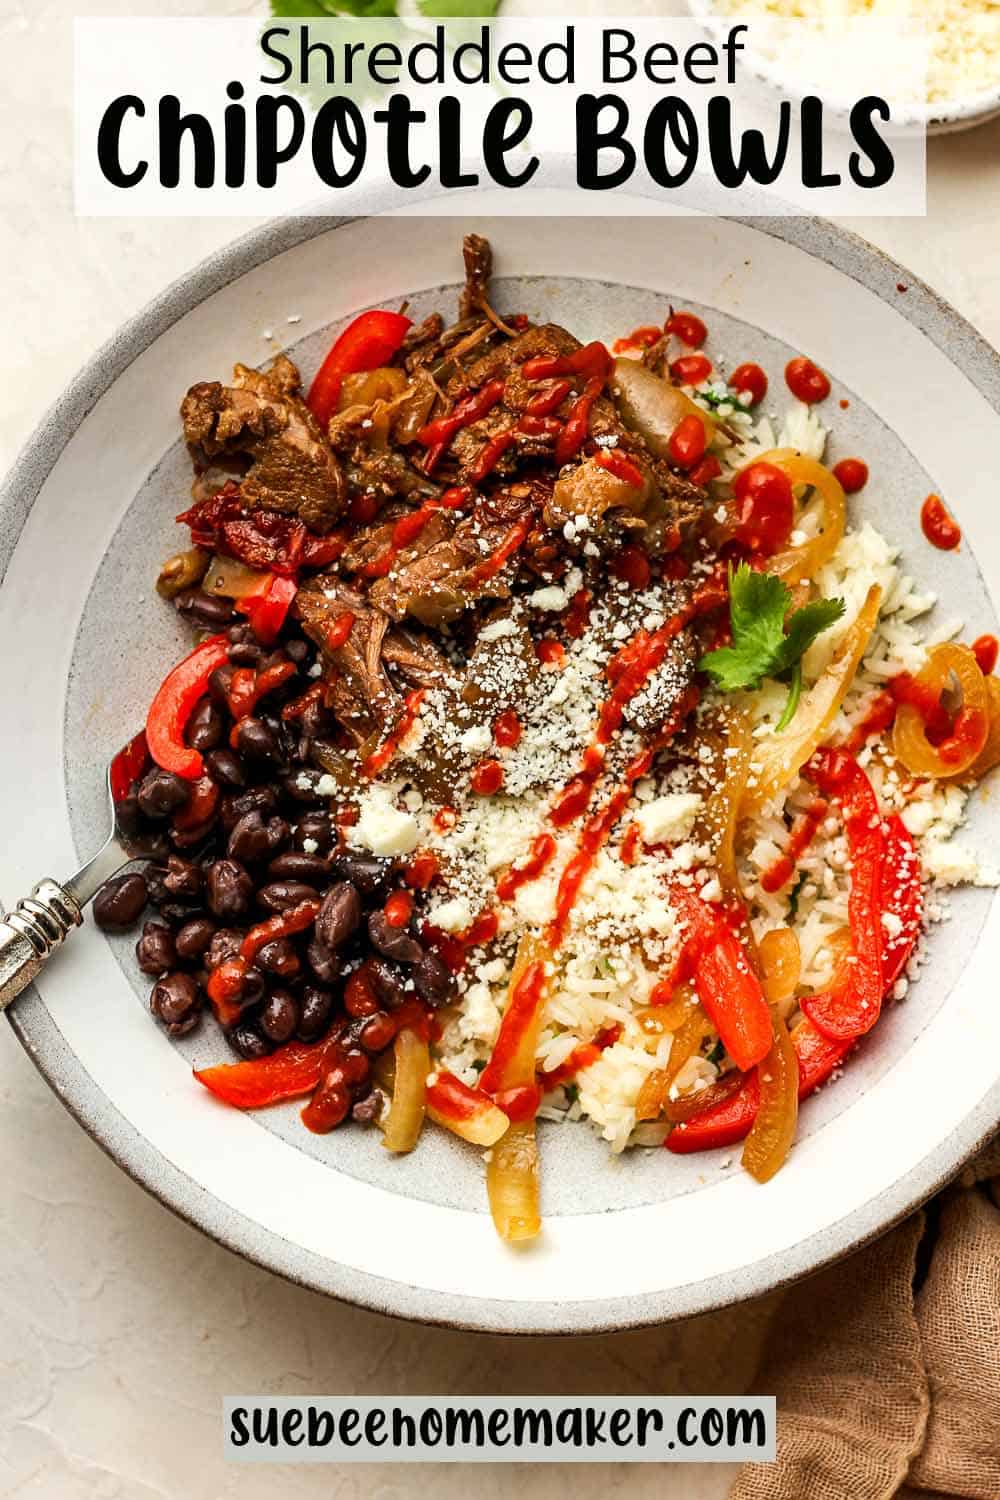 A shredded beef chipotle bowl with sriracha.